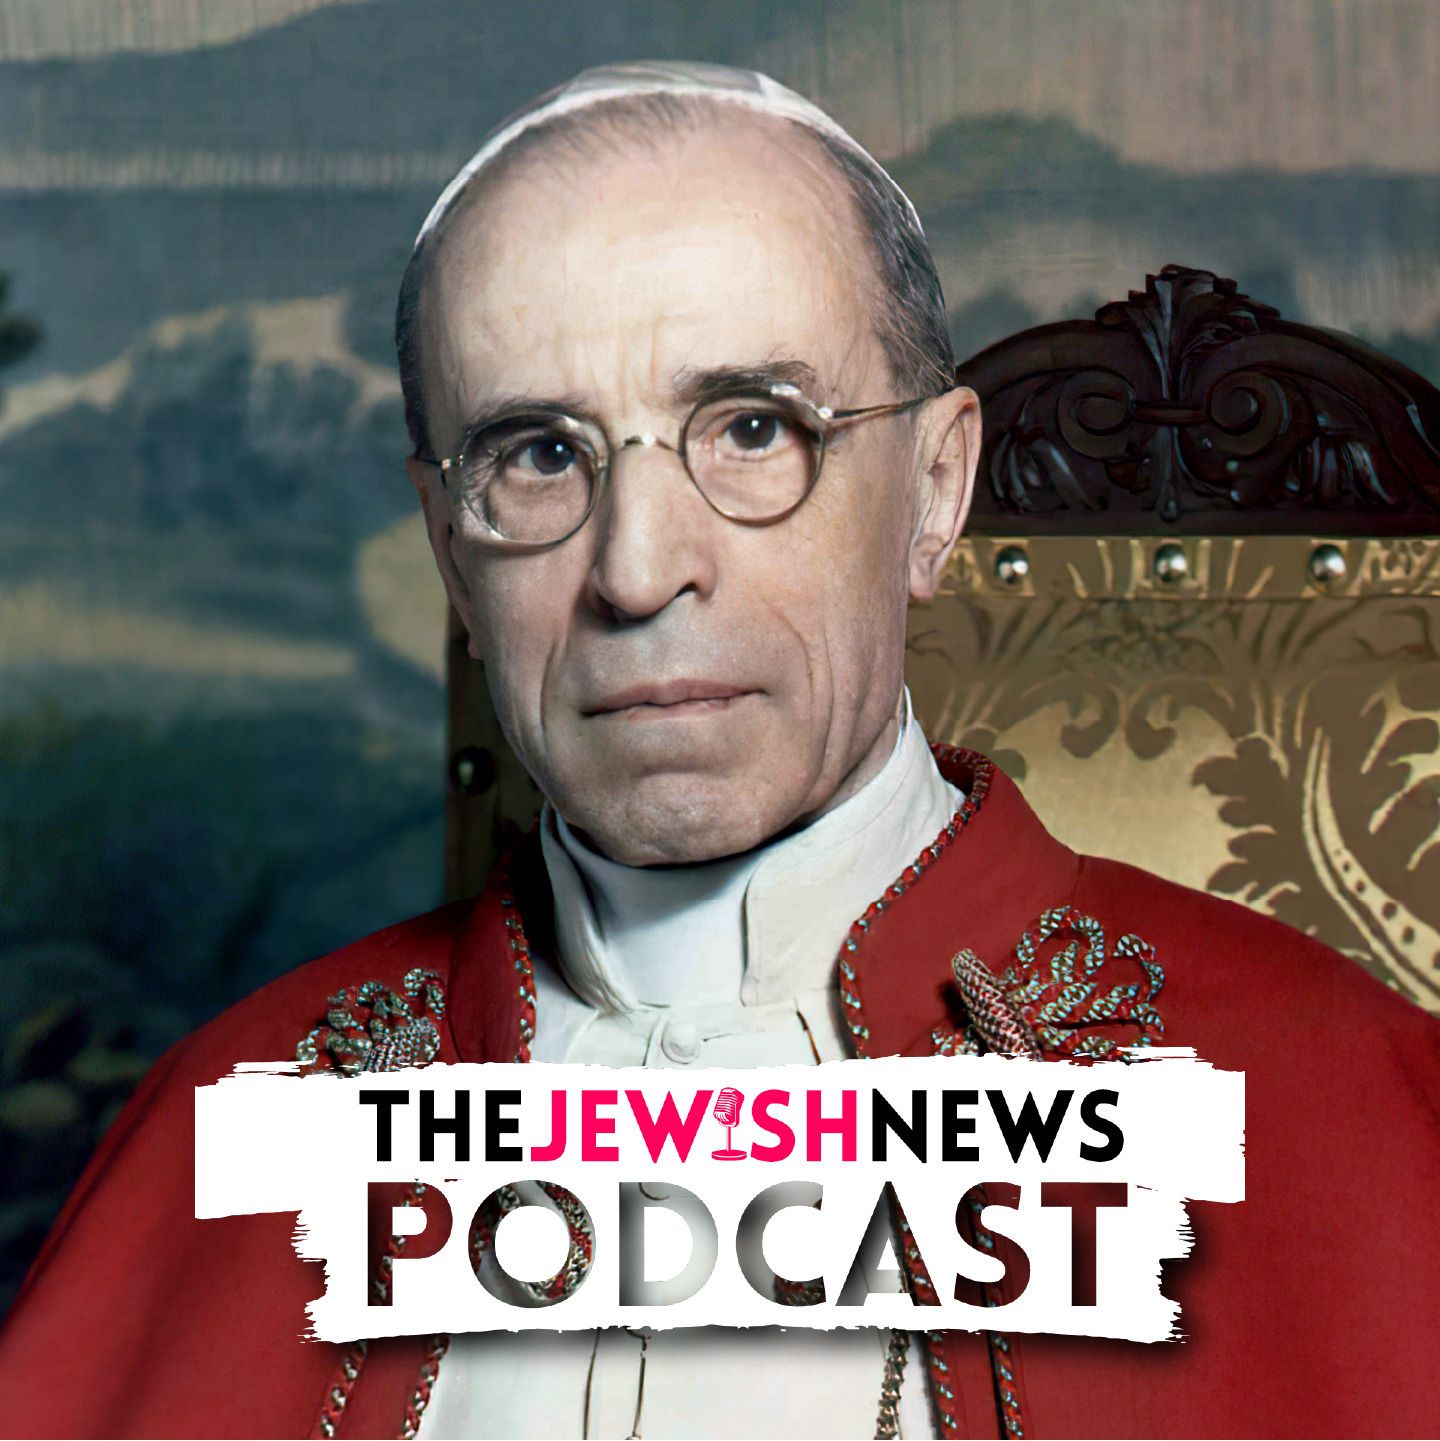 89: Did the pope ignore the Holocaust?